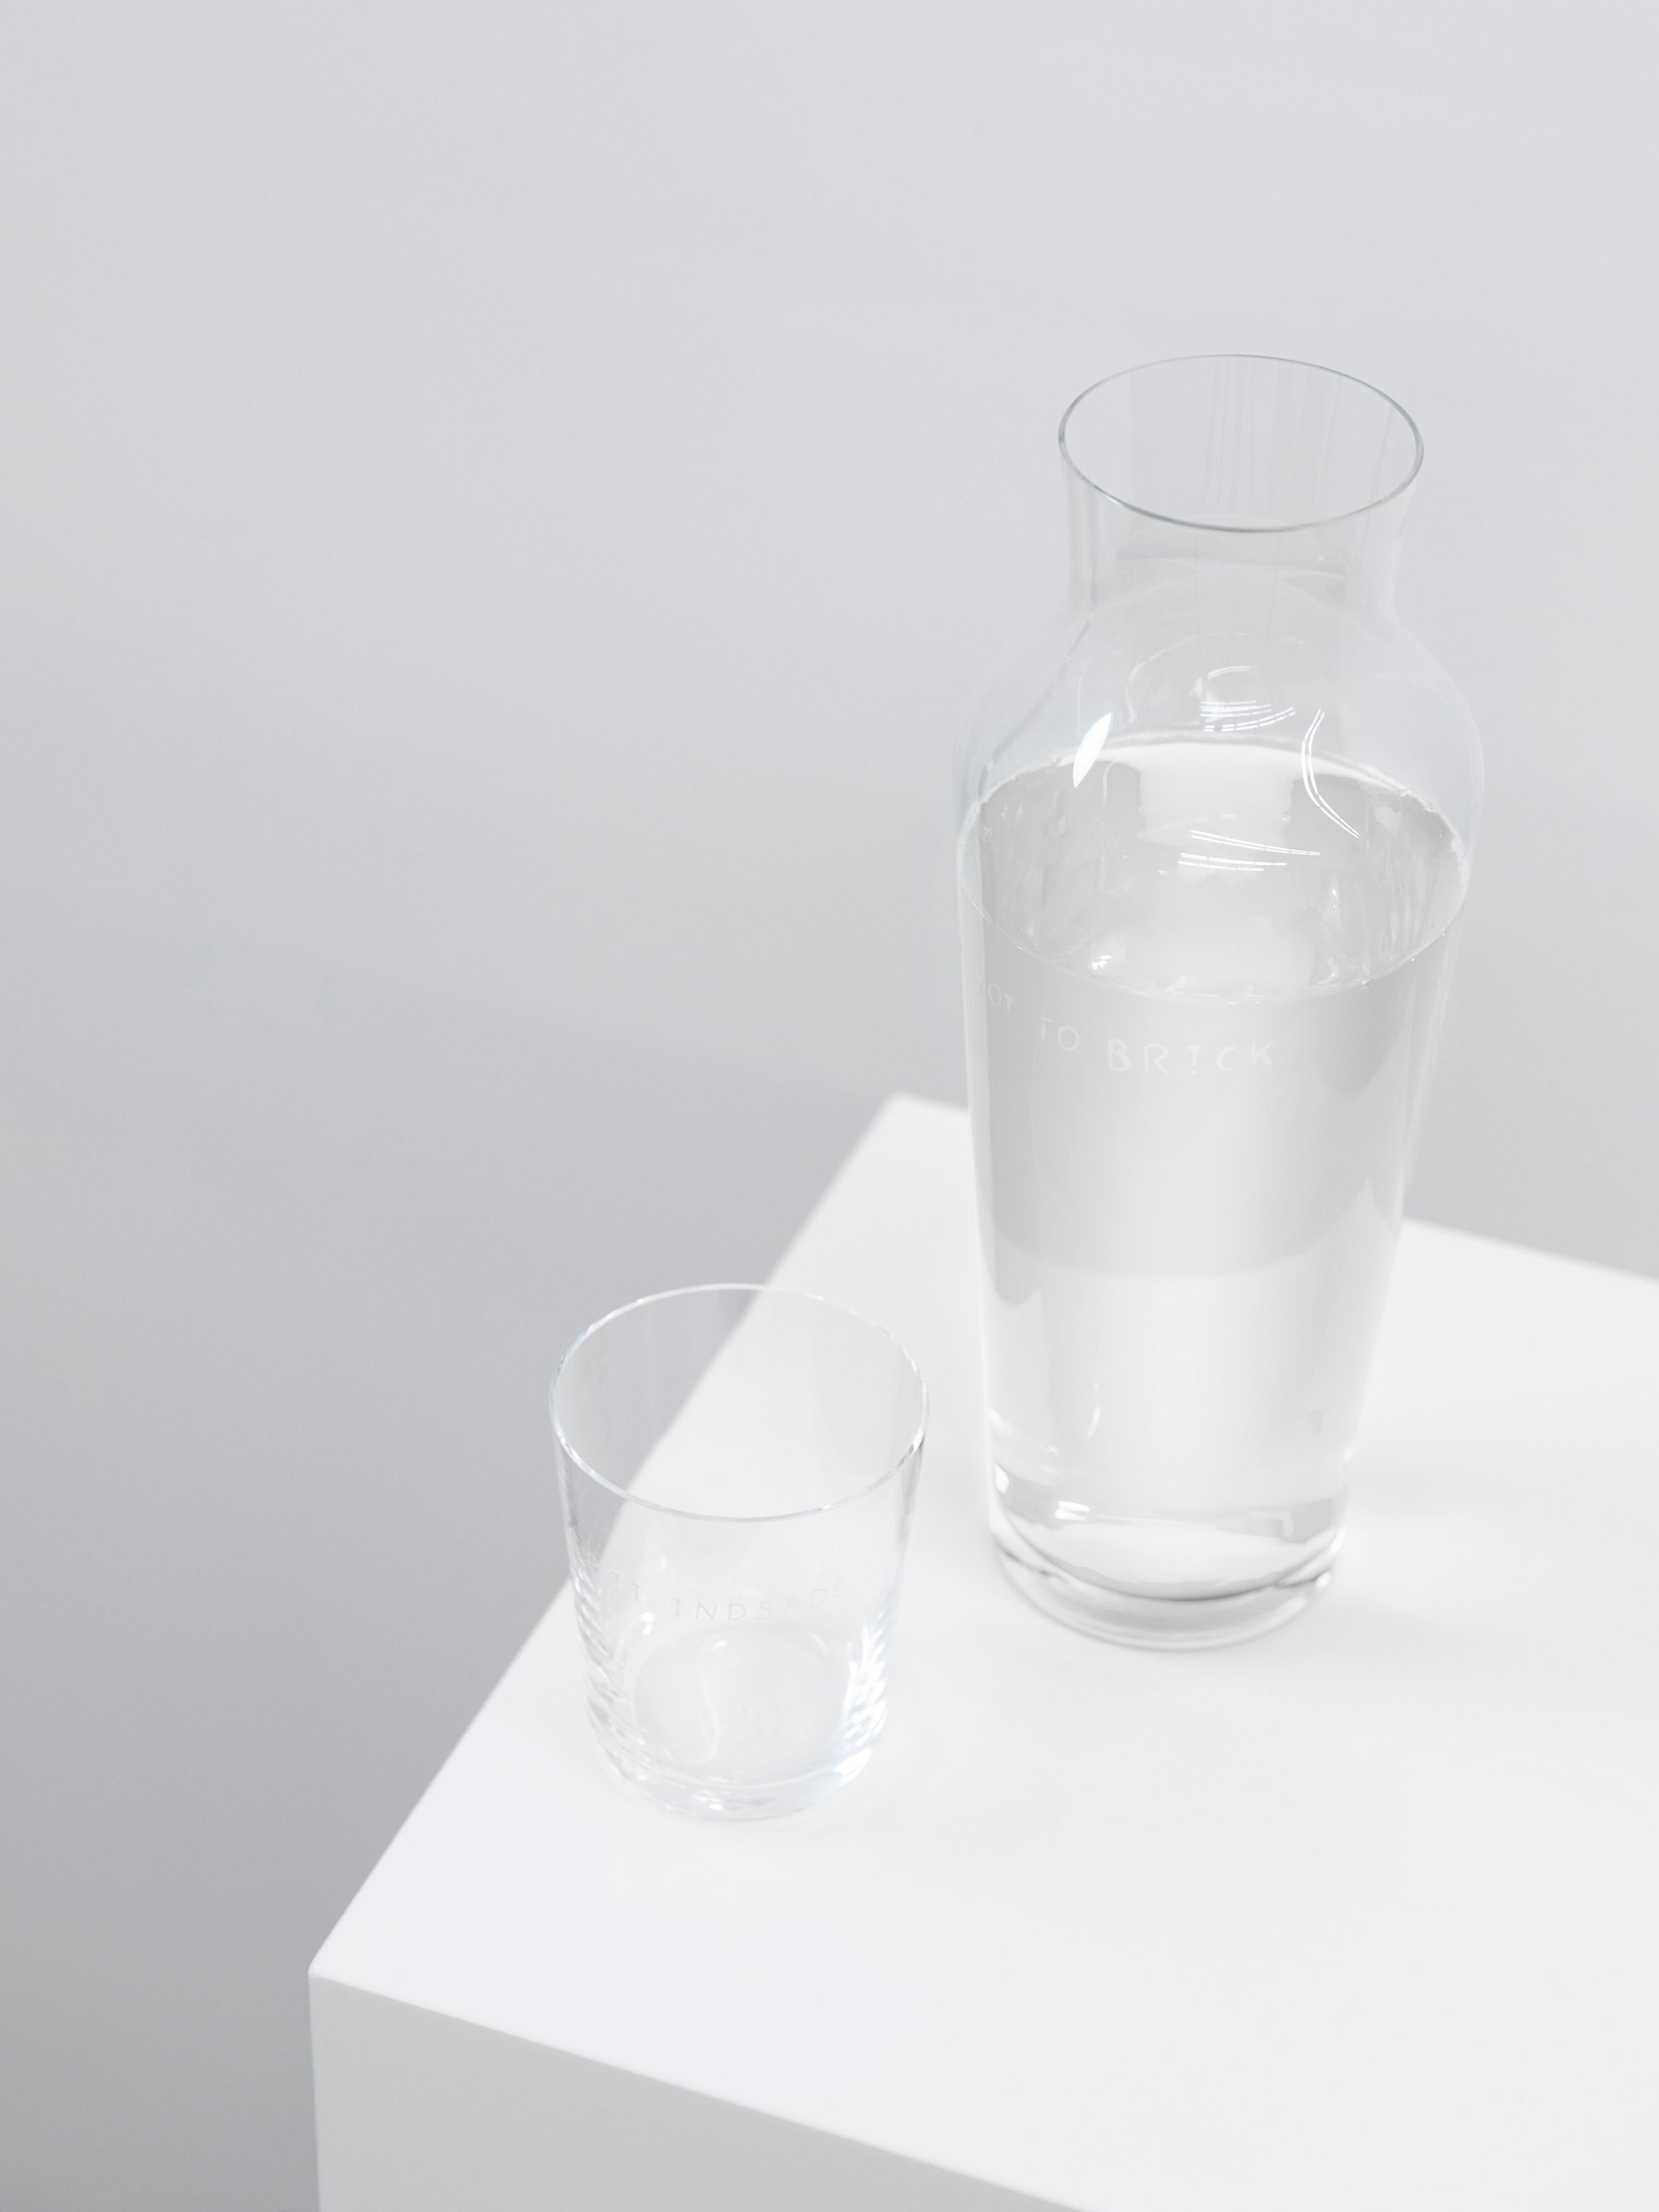 Danish Hasle Glass by Gudrun Hasle for Normann X Brask Art Collection For Sale